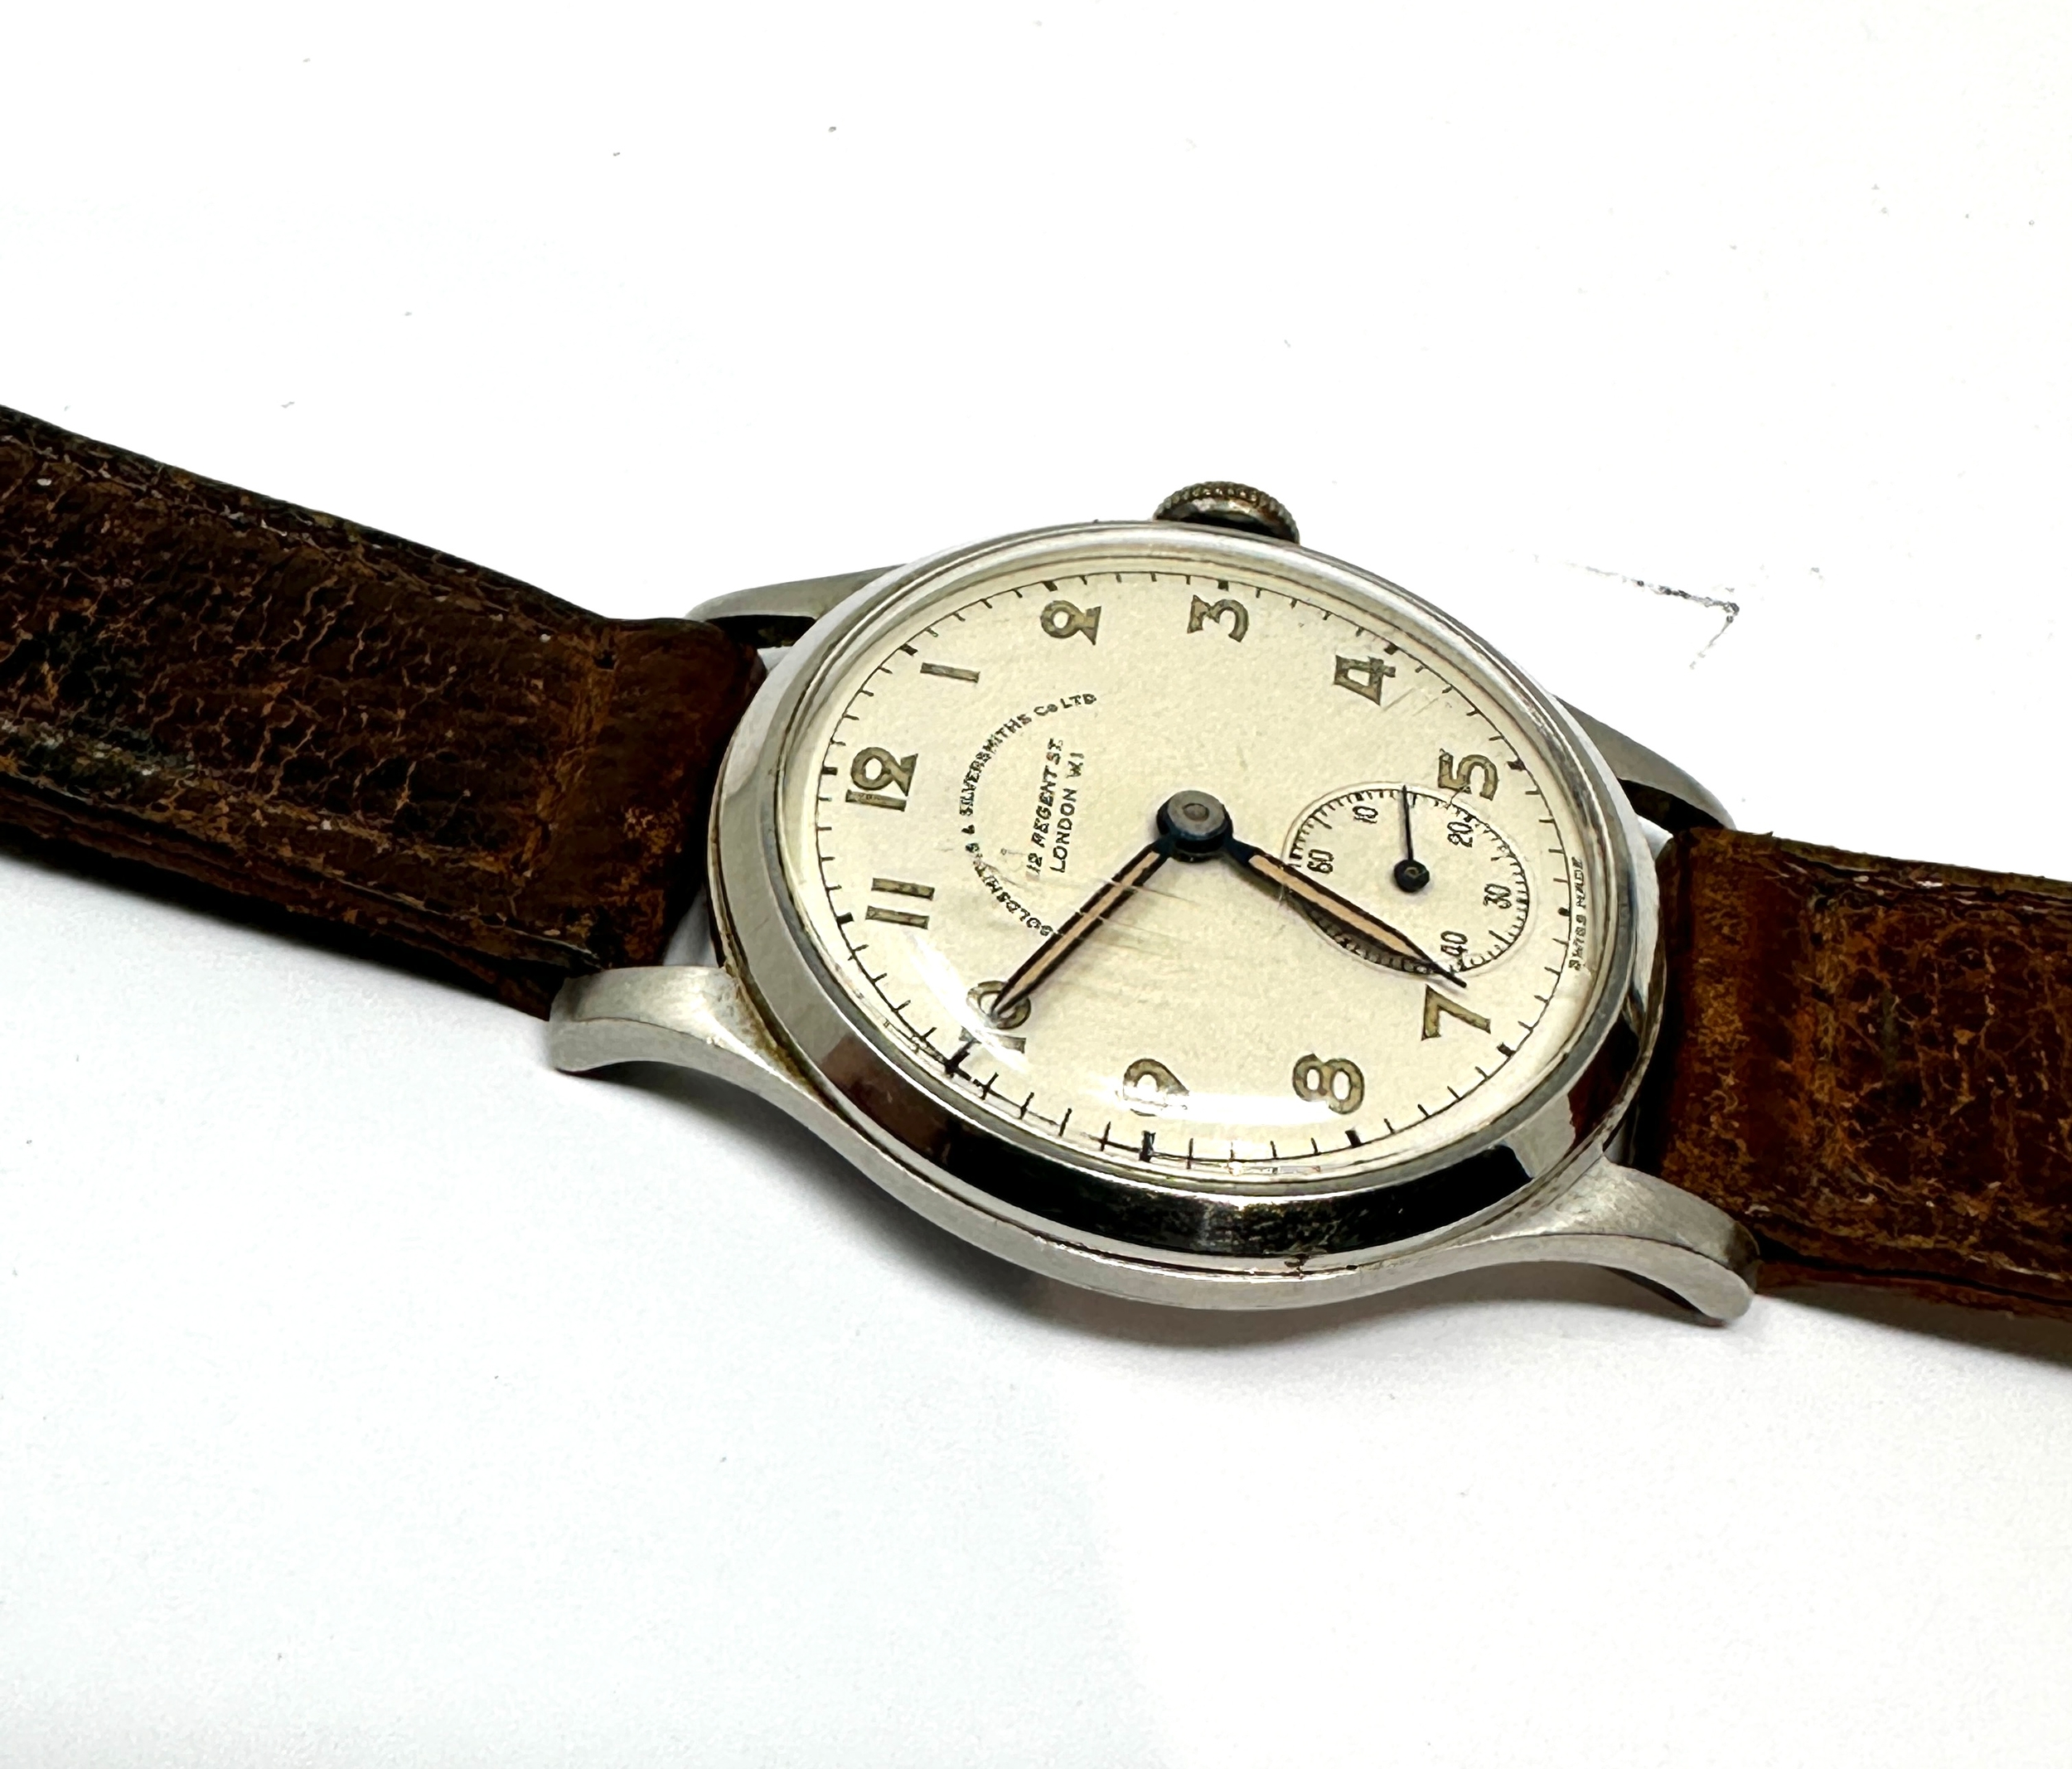 Vintage Goldsmiths and Silversmiths co Ltd gents wristwatch the watch is ticking - Image 3 of 4